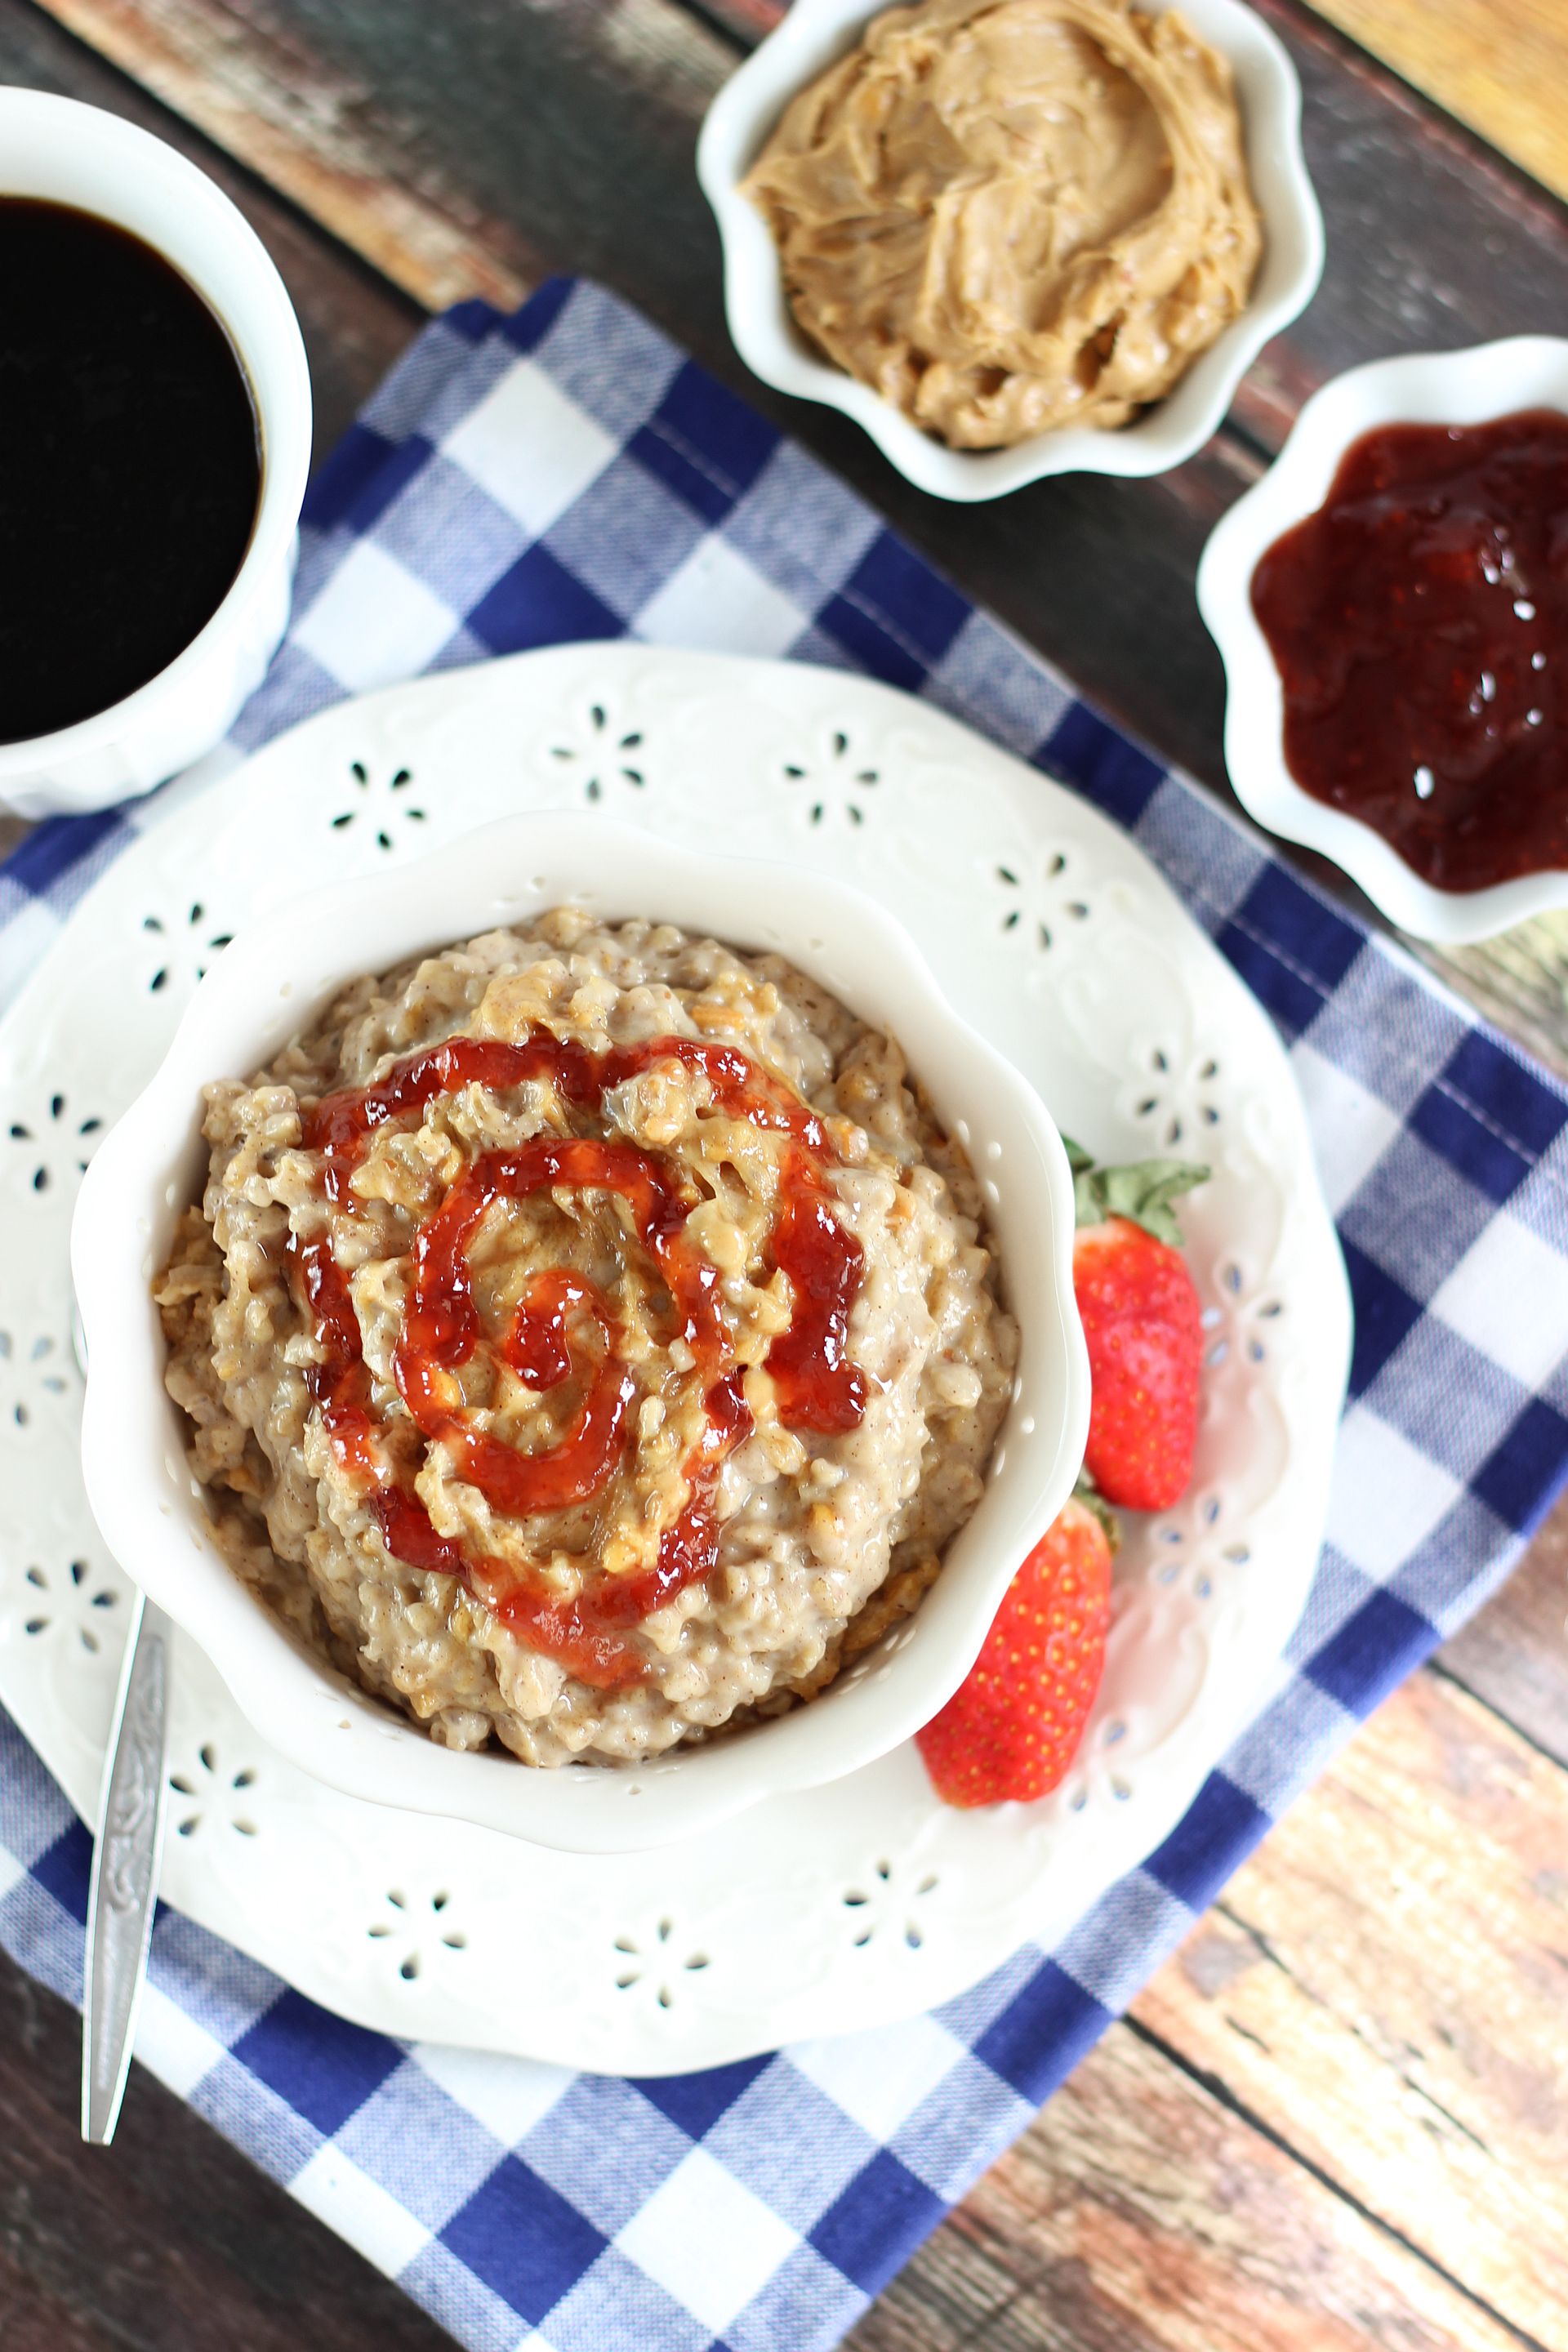 Peanut Butter and Jelly Slow Cooker Steel Cut Oats